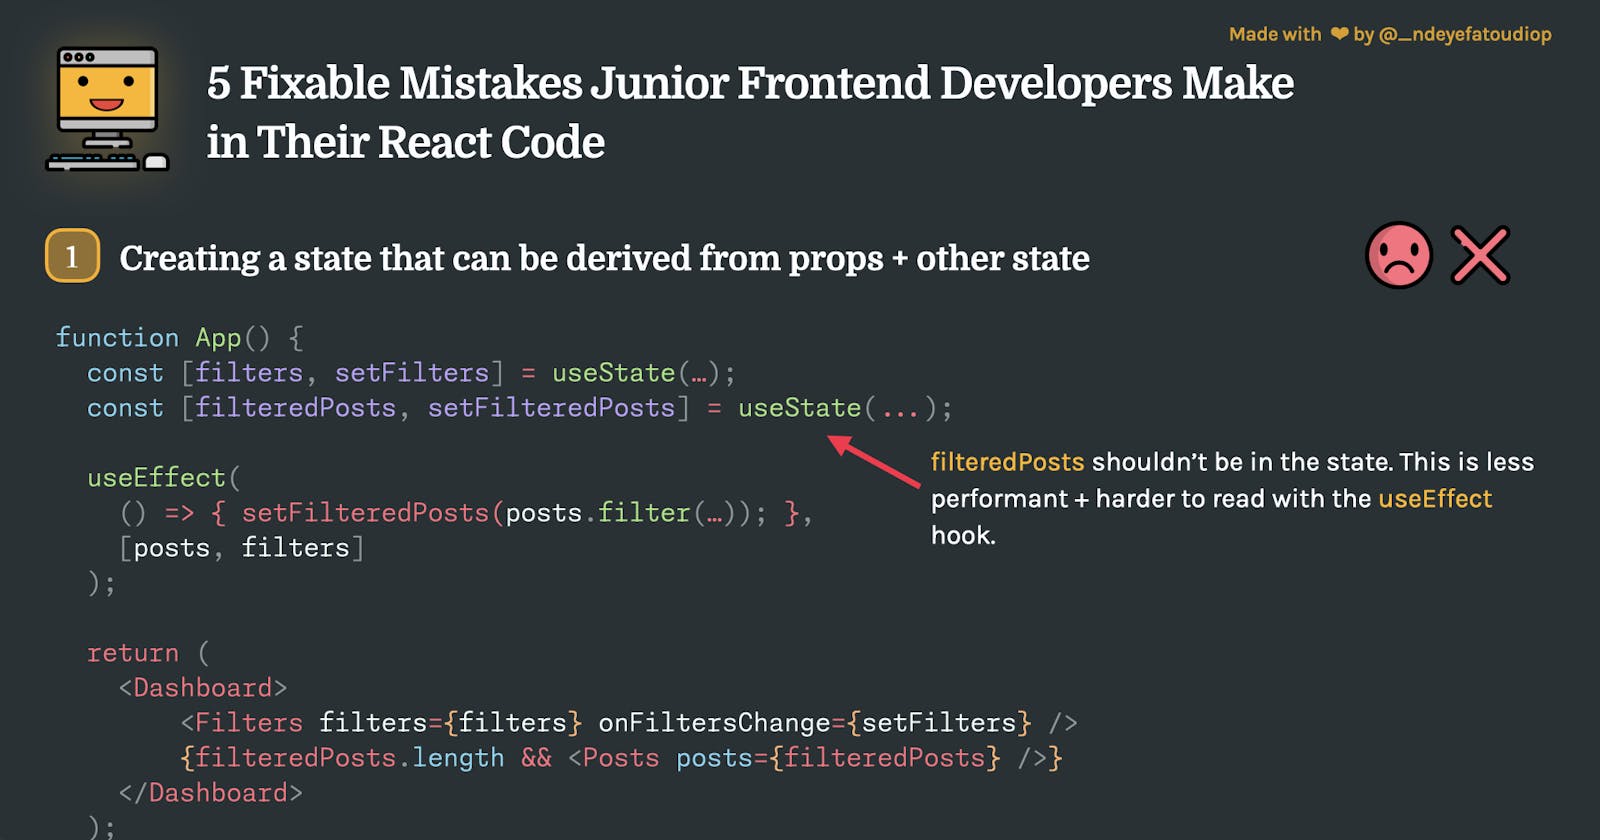 5 Small (Yet Easily Fixable) Mistakes Junior Frontend Developers Often Make in Their React Code